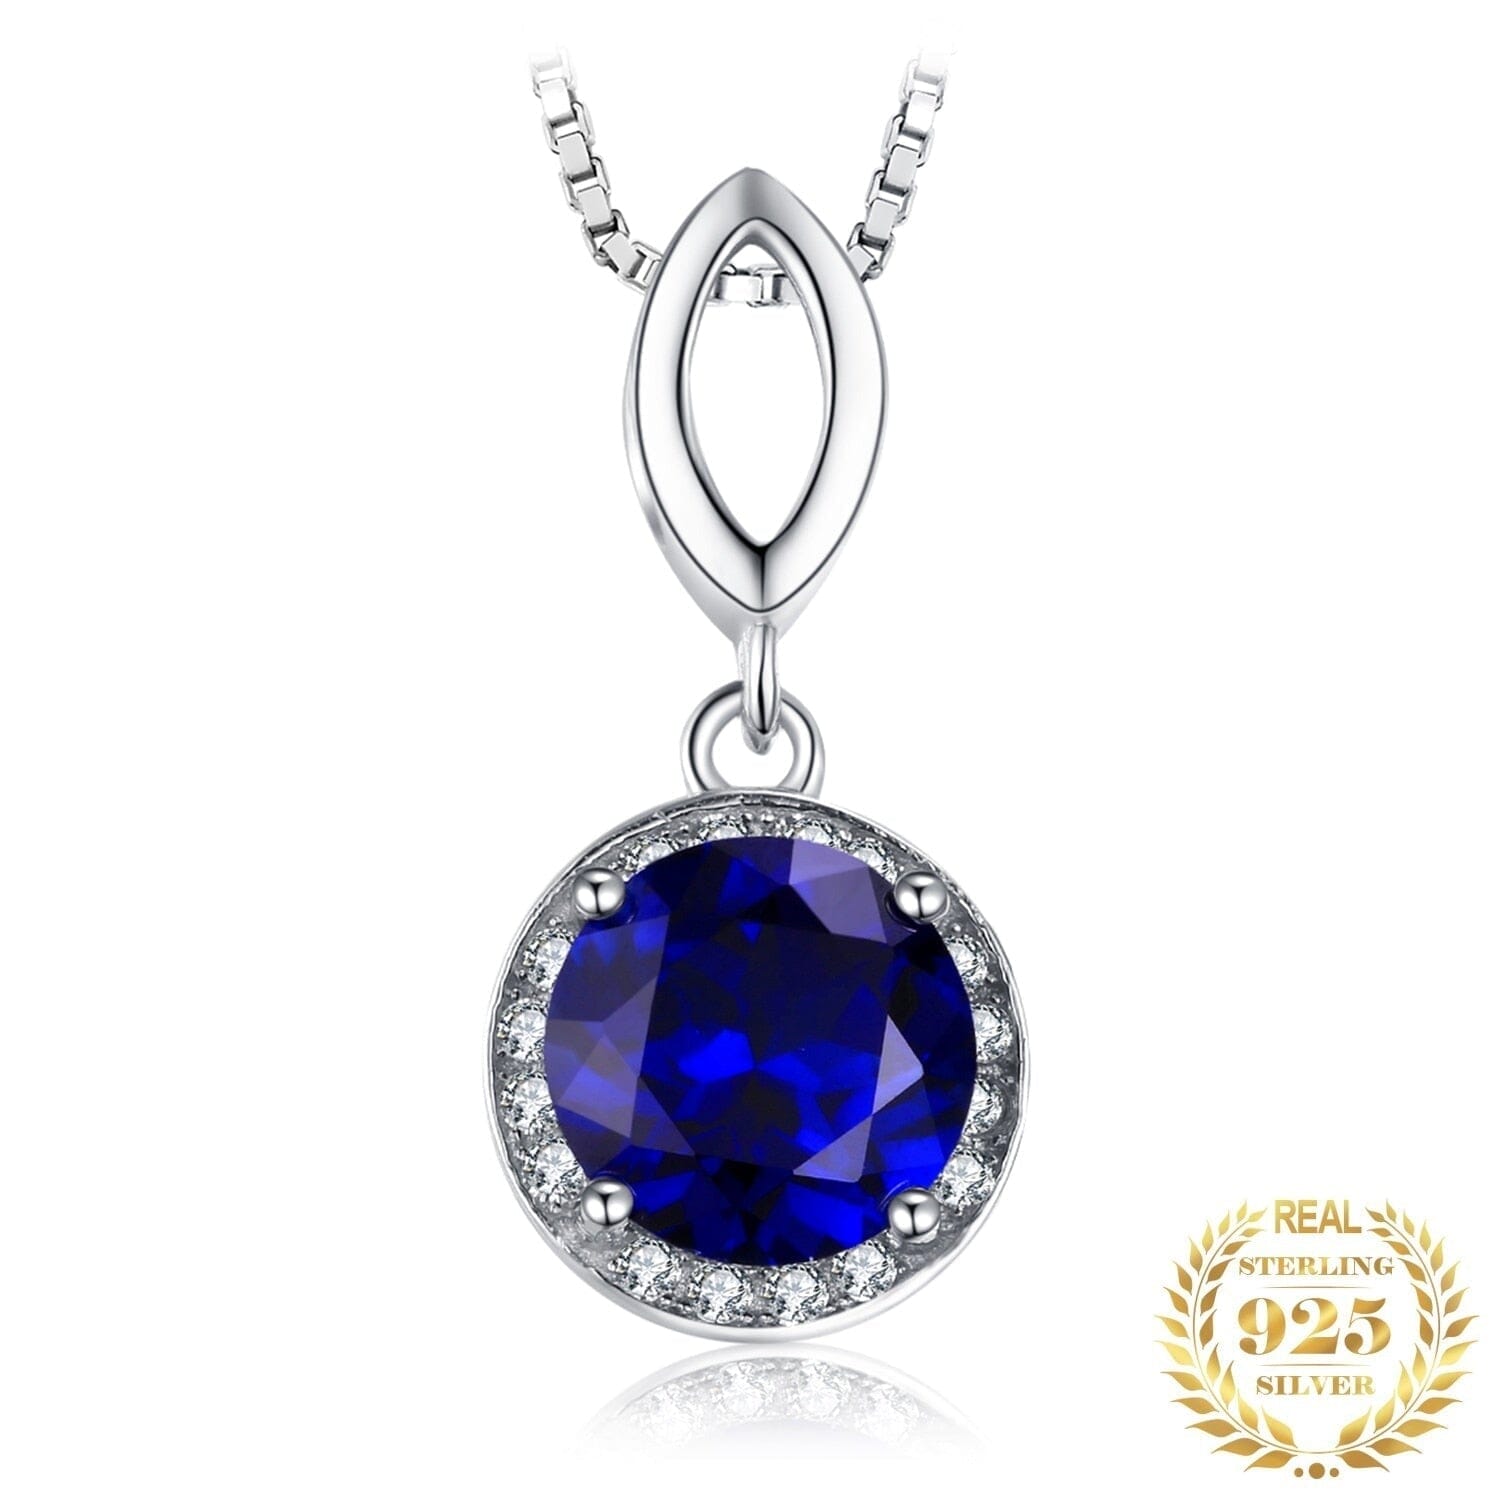 Fashion 2.8ct Created Blue Sapphire Pendant Necklace ( No Chain ) - 925 Sterling SilverNecklace